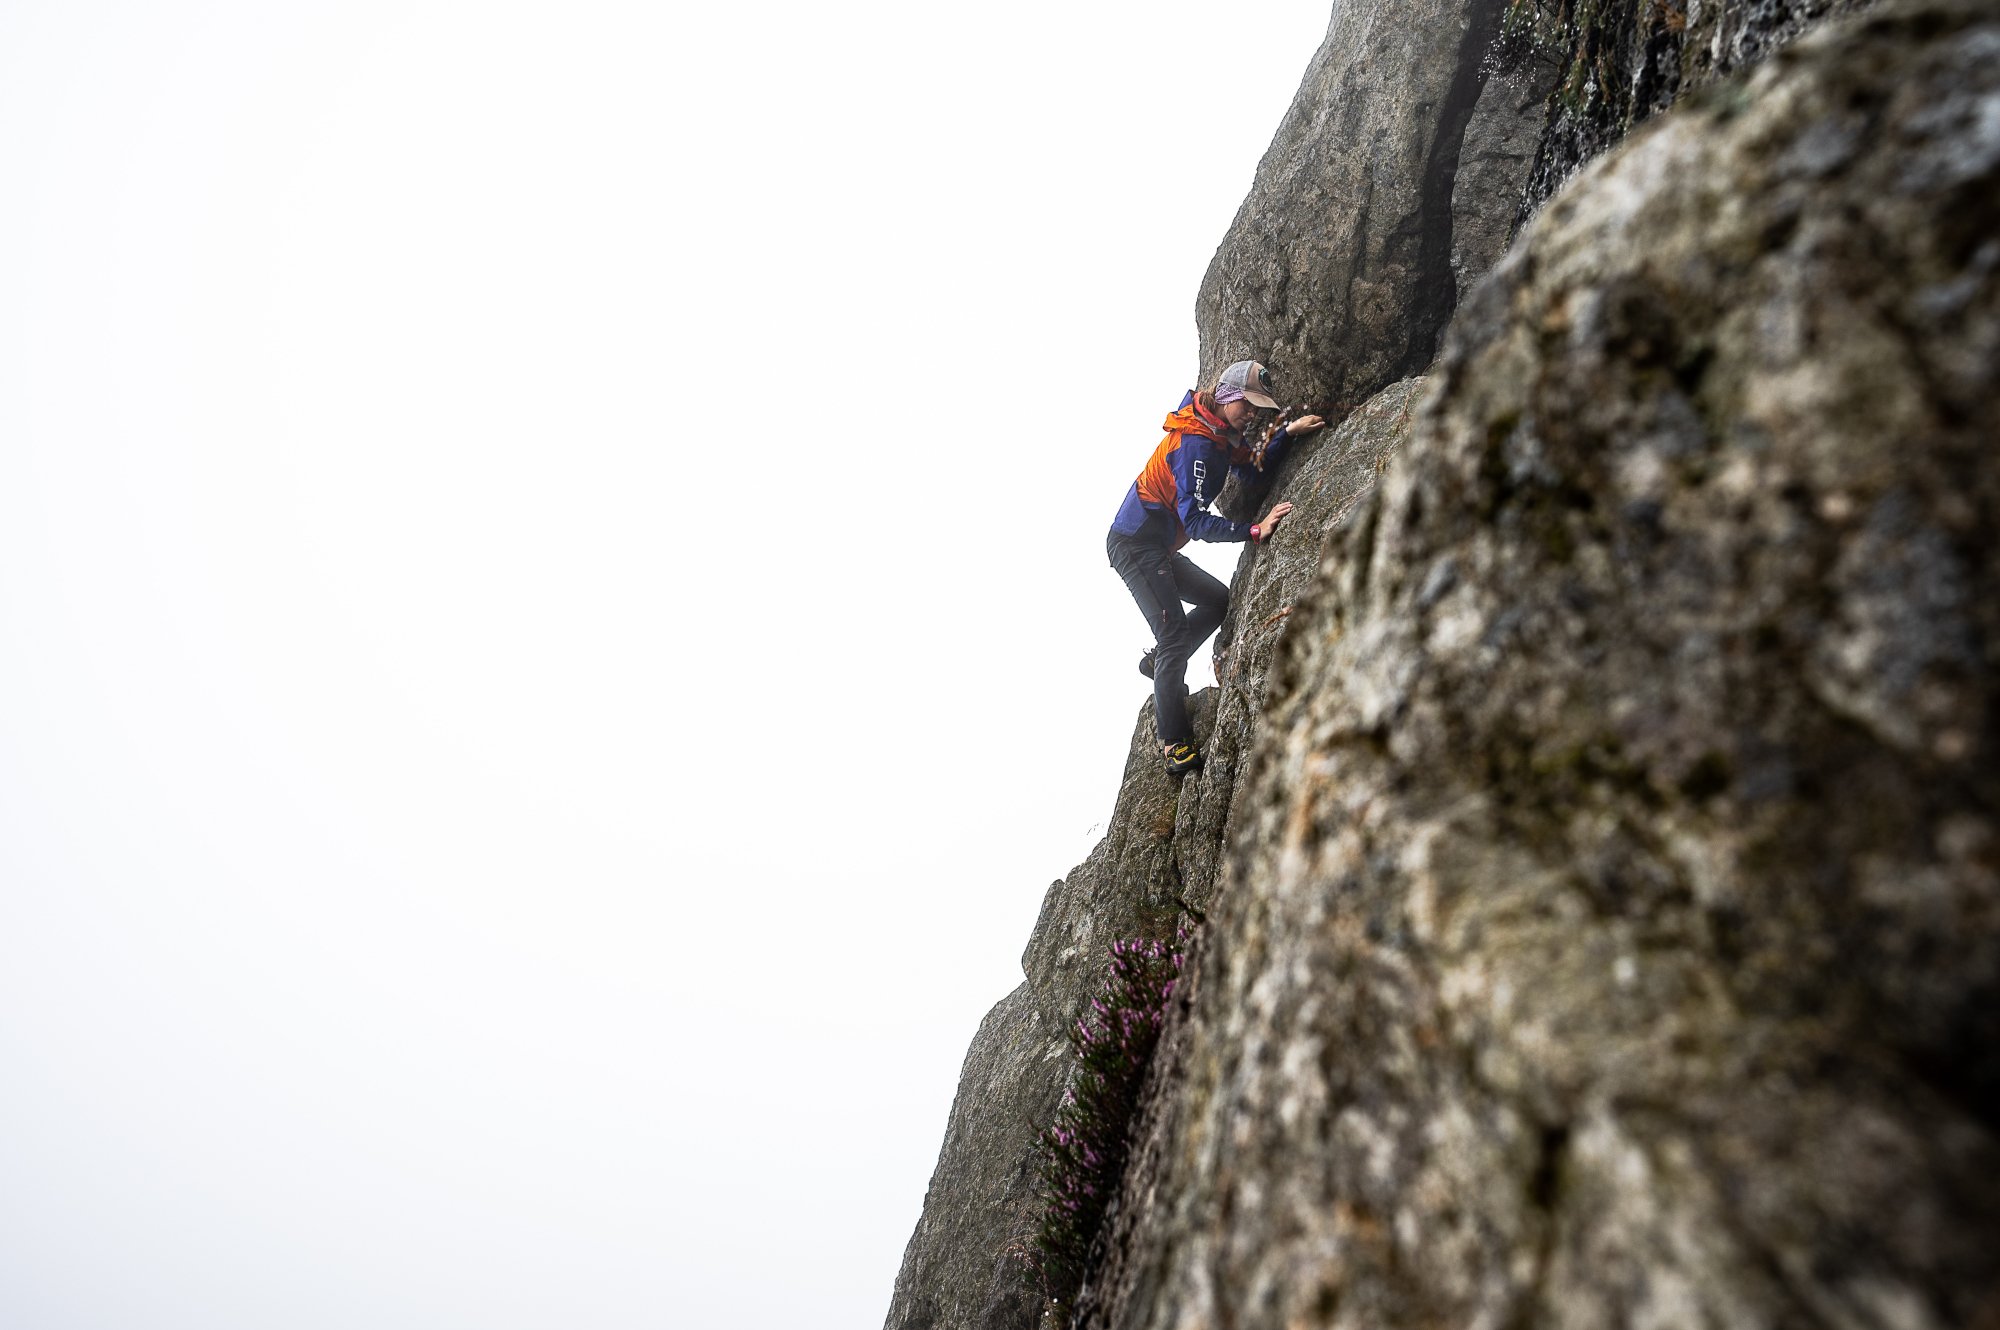 Anna tackles Grooved Arete, Tryfan